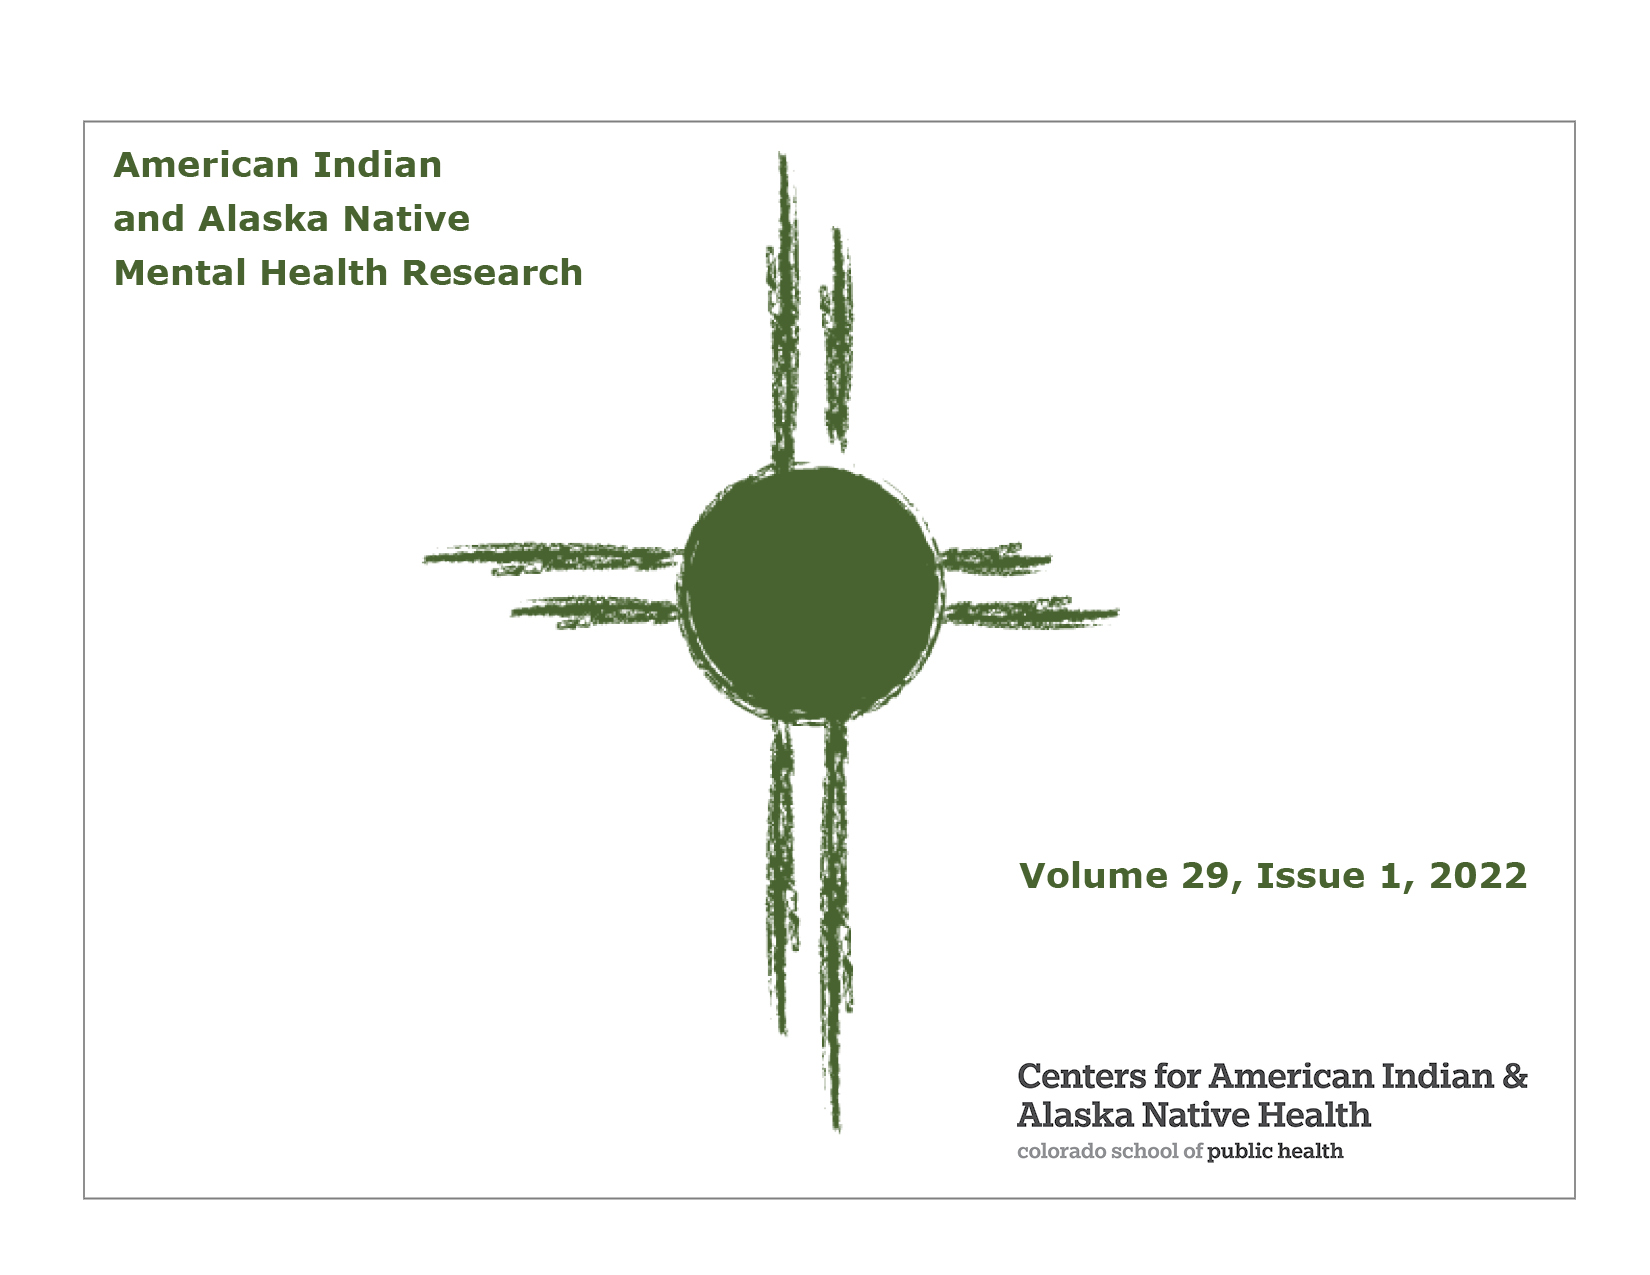 Cover of the AIANMHR journal